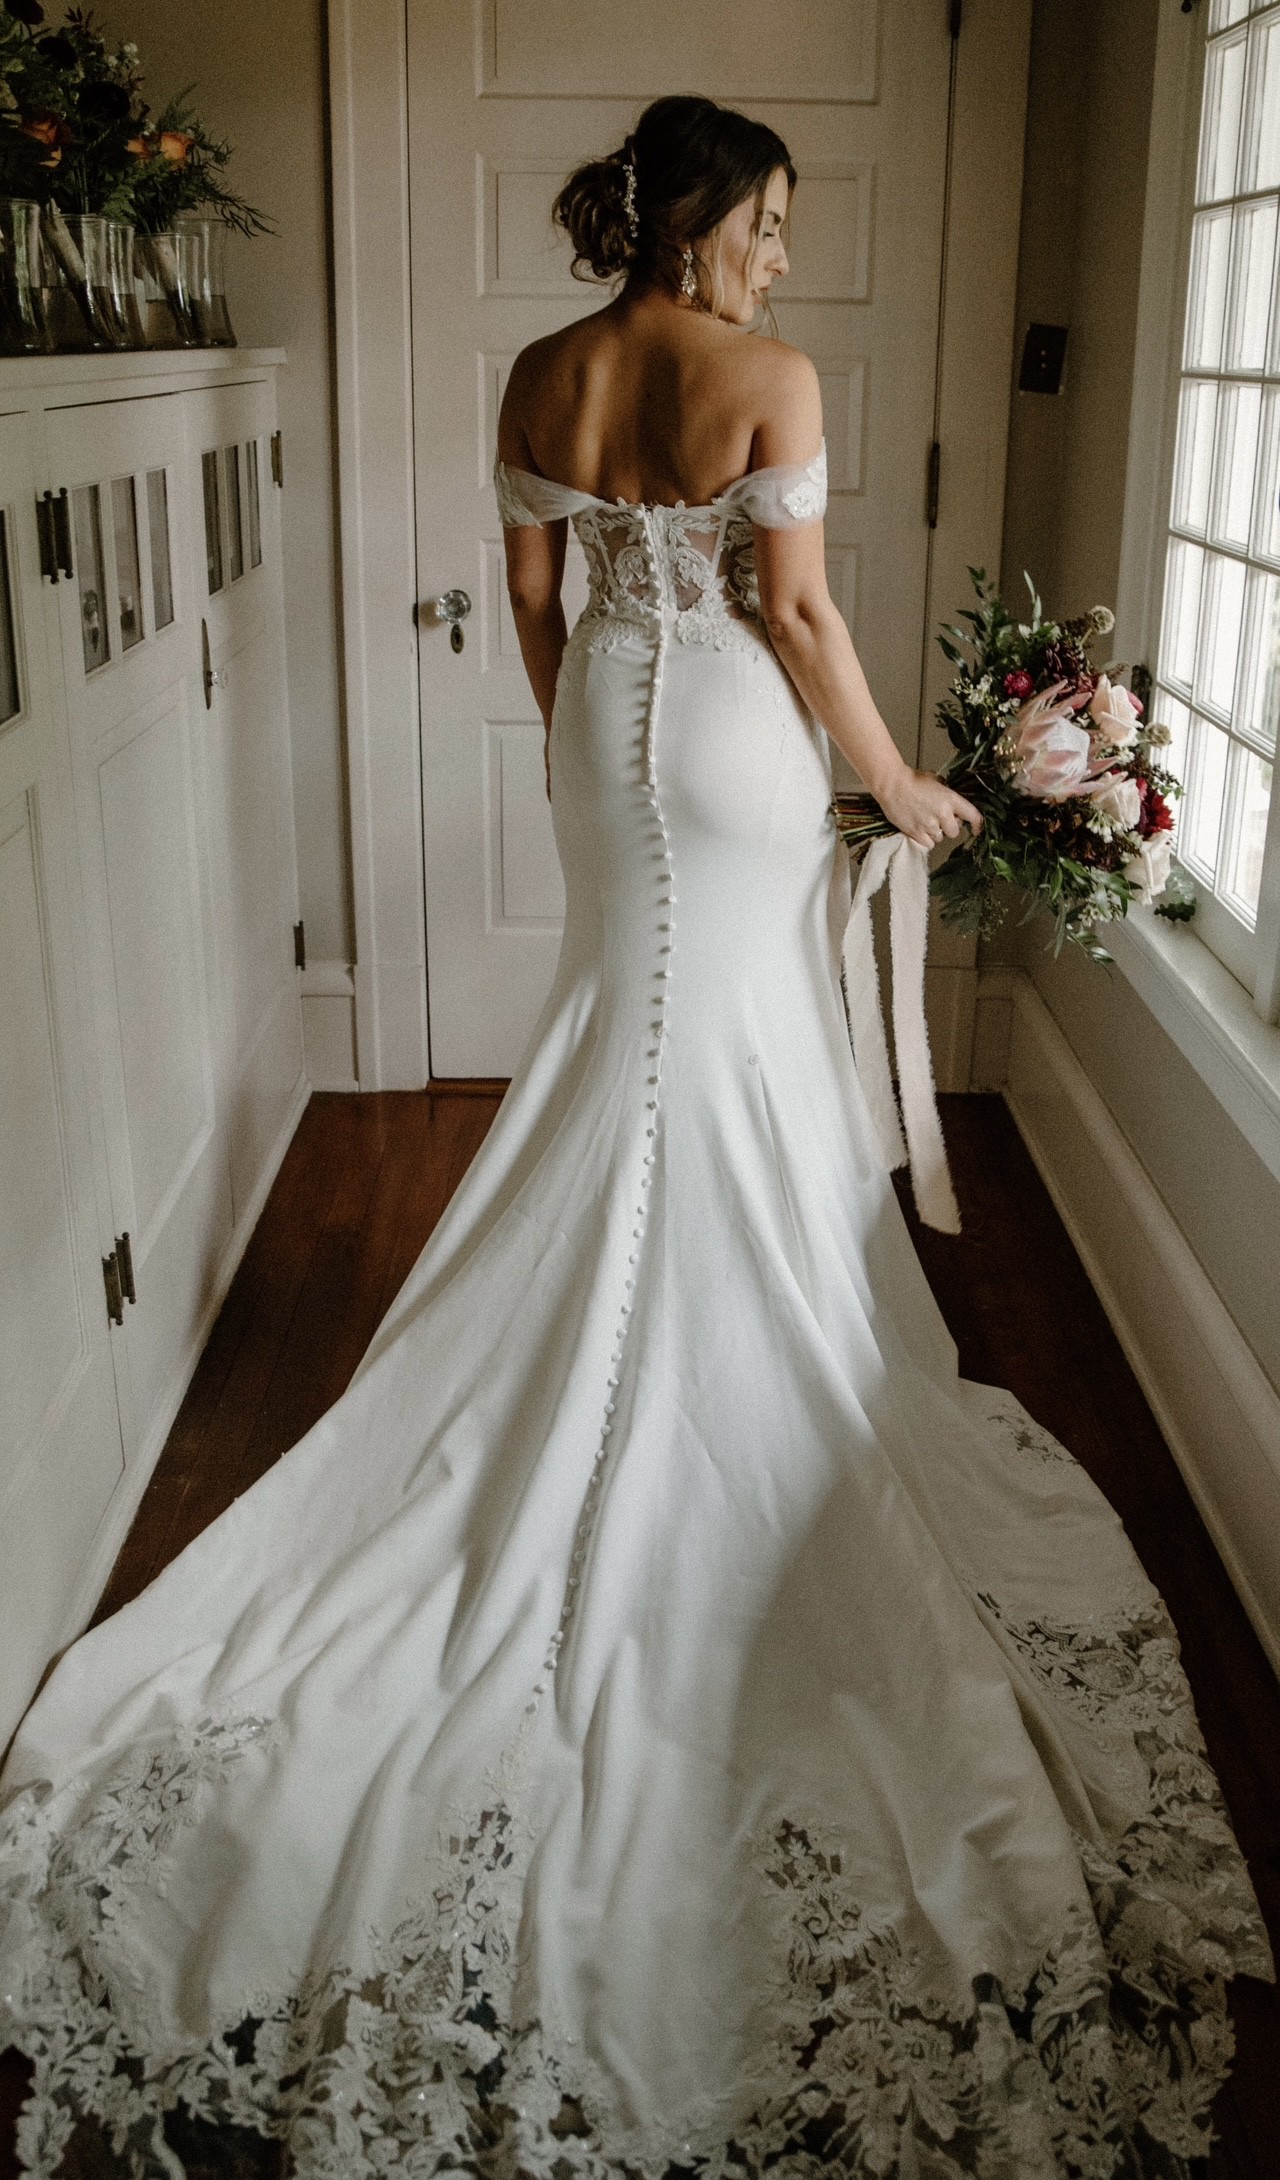 Lace Off the Shoulder Fitted Crepe Wedding Dress  Allure bridal, Allure  wedding dresses, Crepe wedding dress